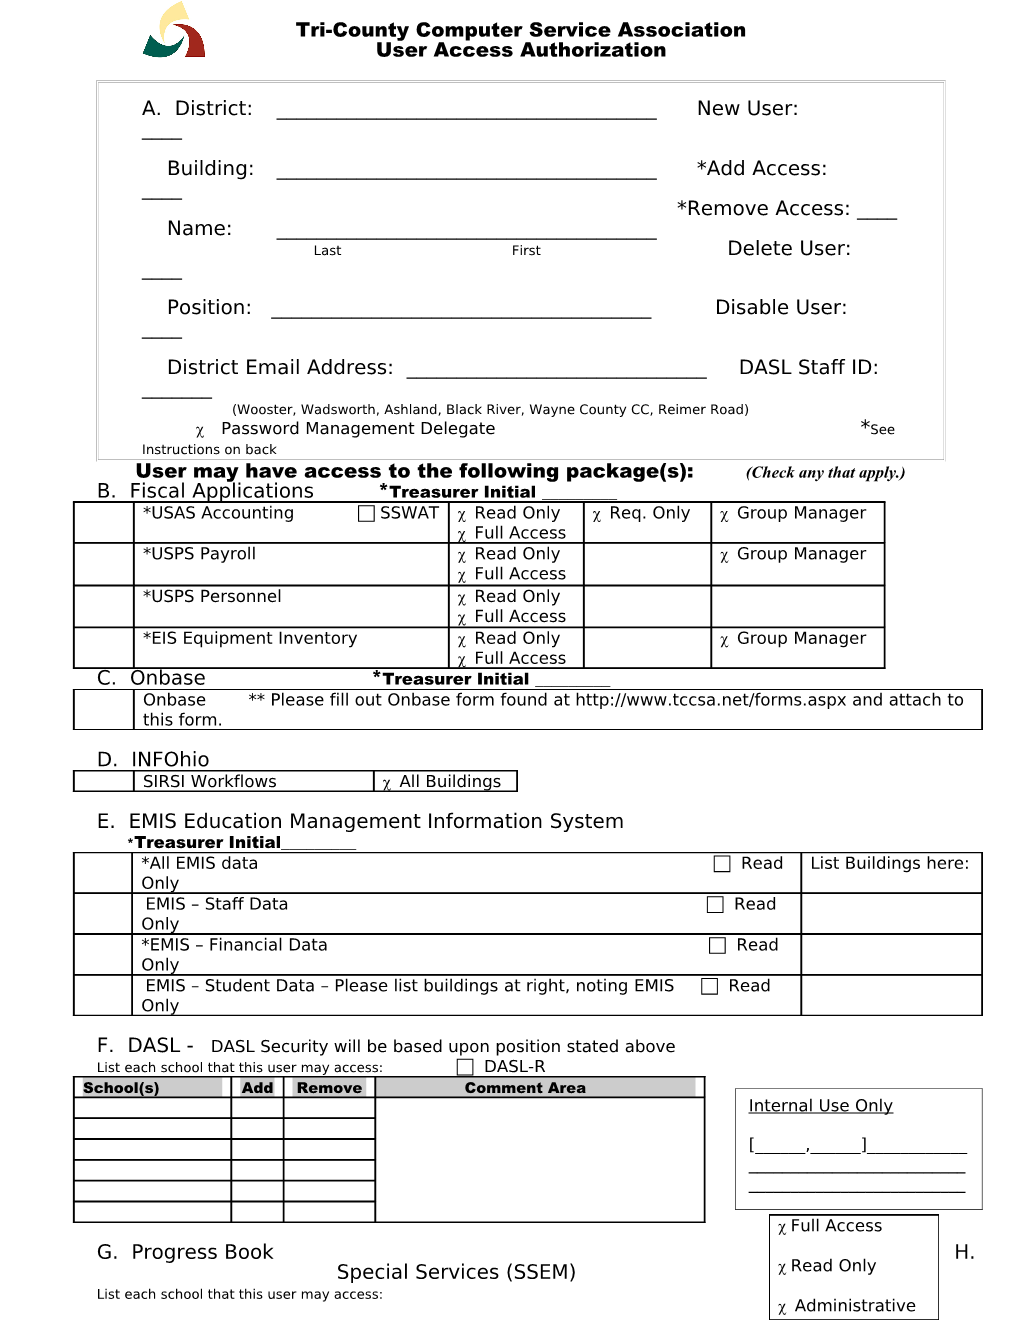 Authorization Form for Users